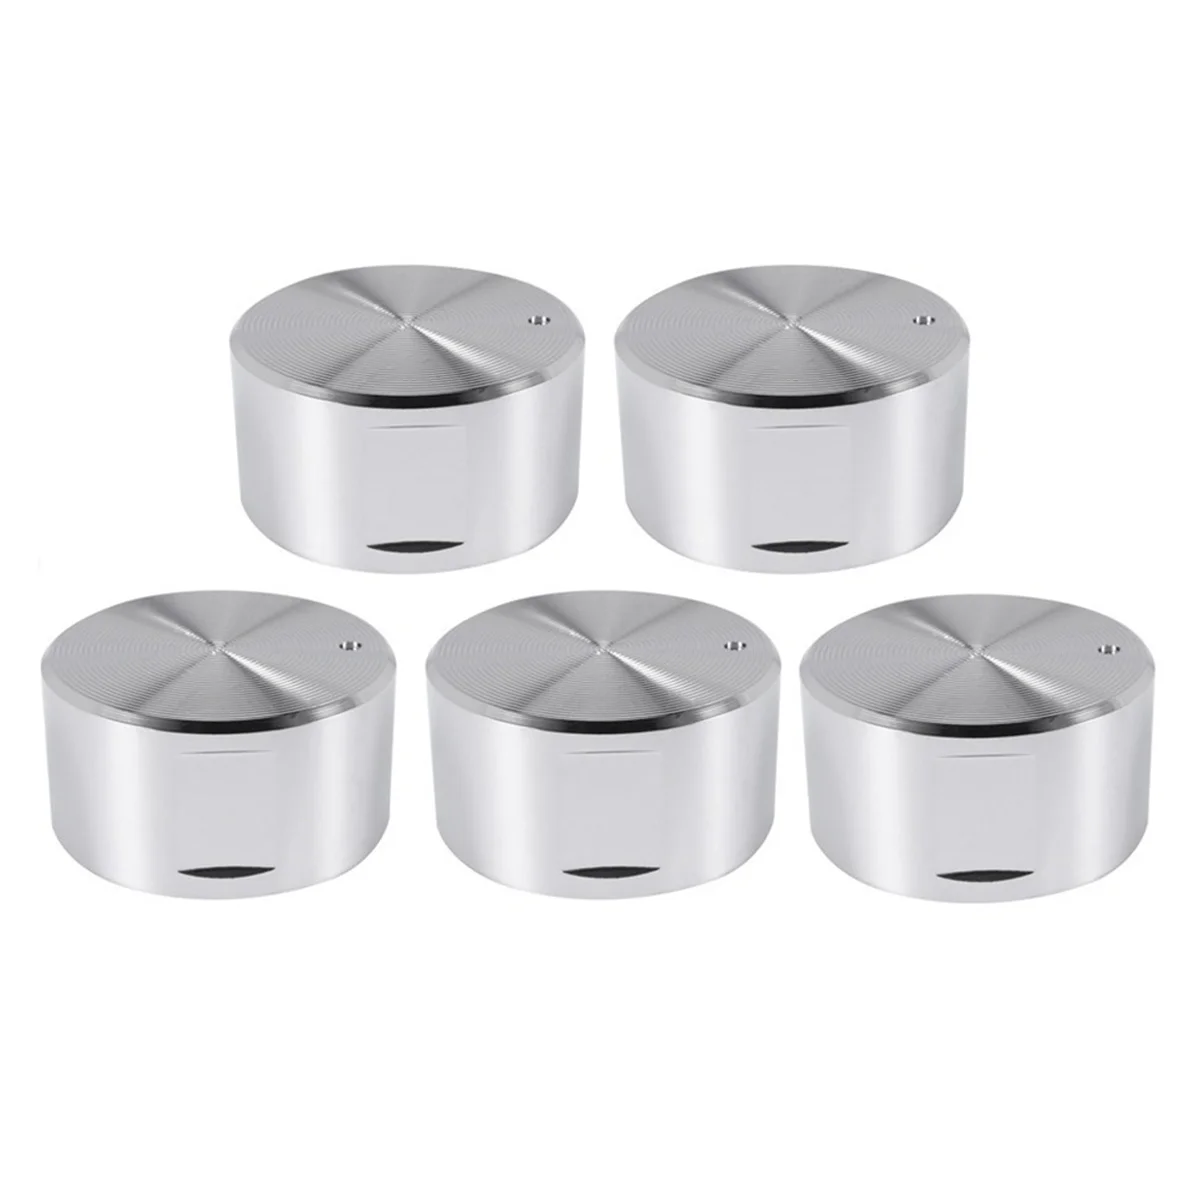 

5 Pcs Metal Gas Stove Knobs 6mm Cooker Control Range Oven Knob Burner Knob Gas Hob Switch Replacement Accessories